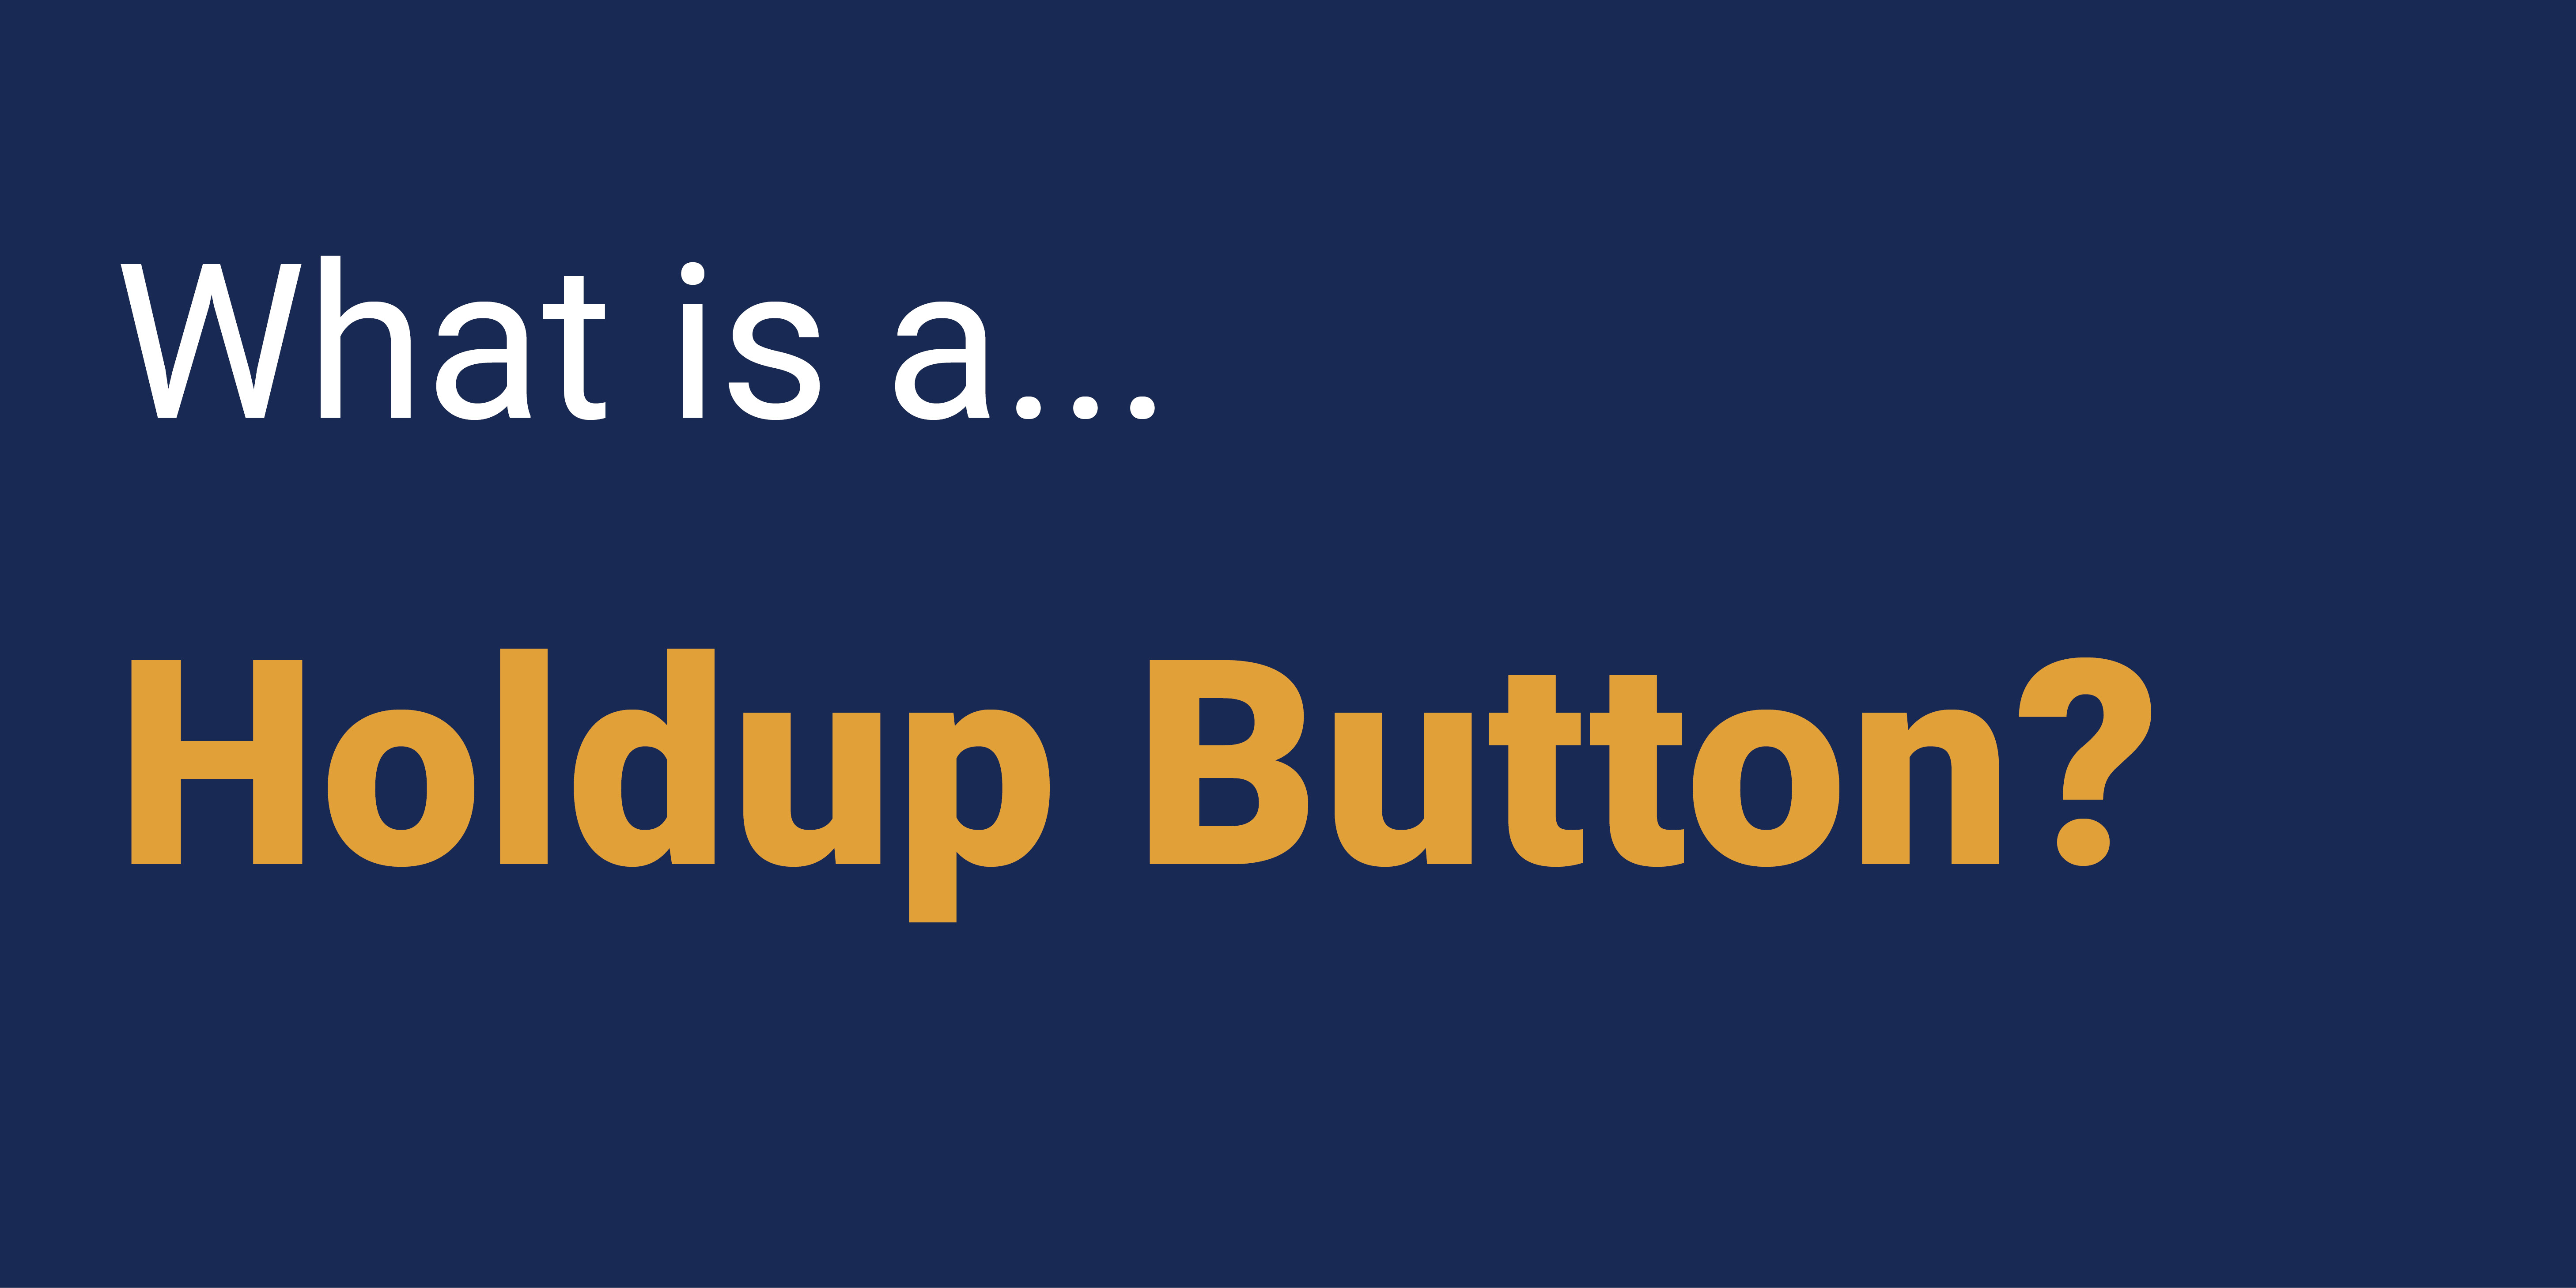 What is a Holdup Button?